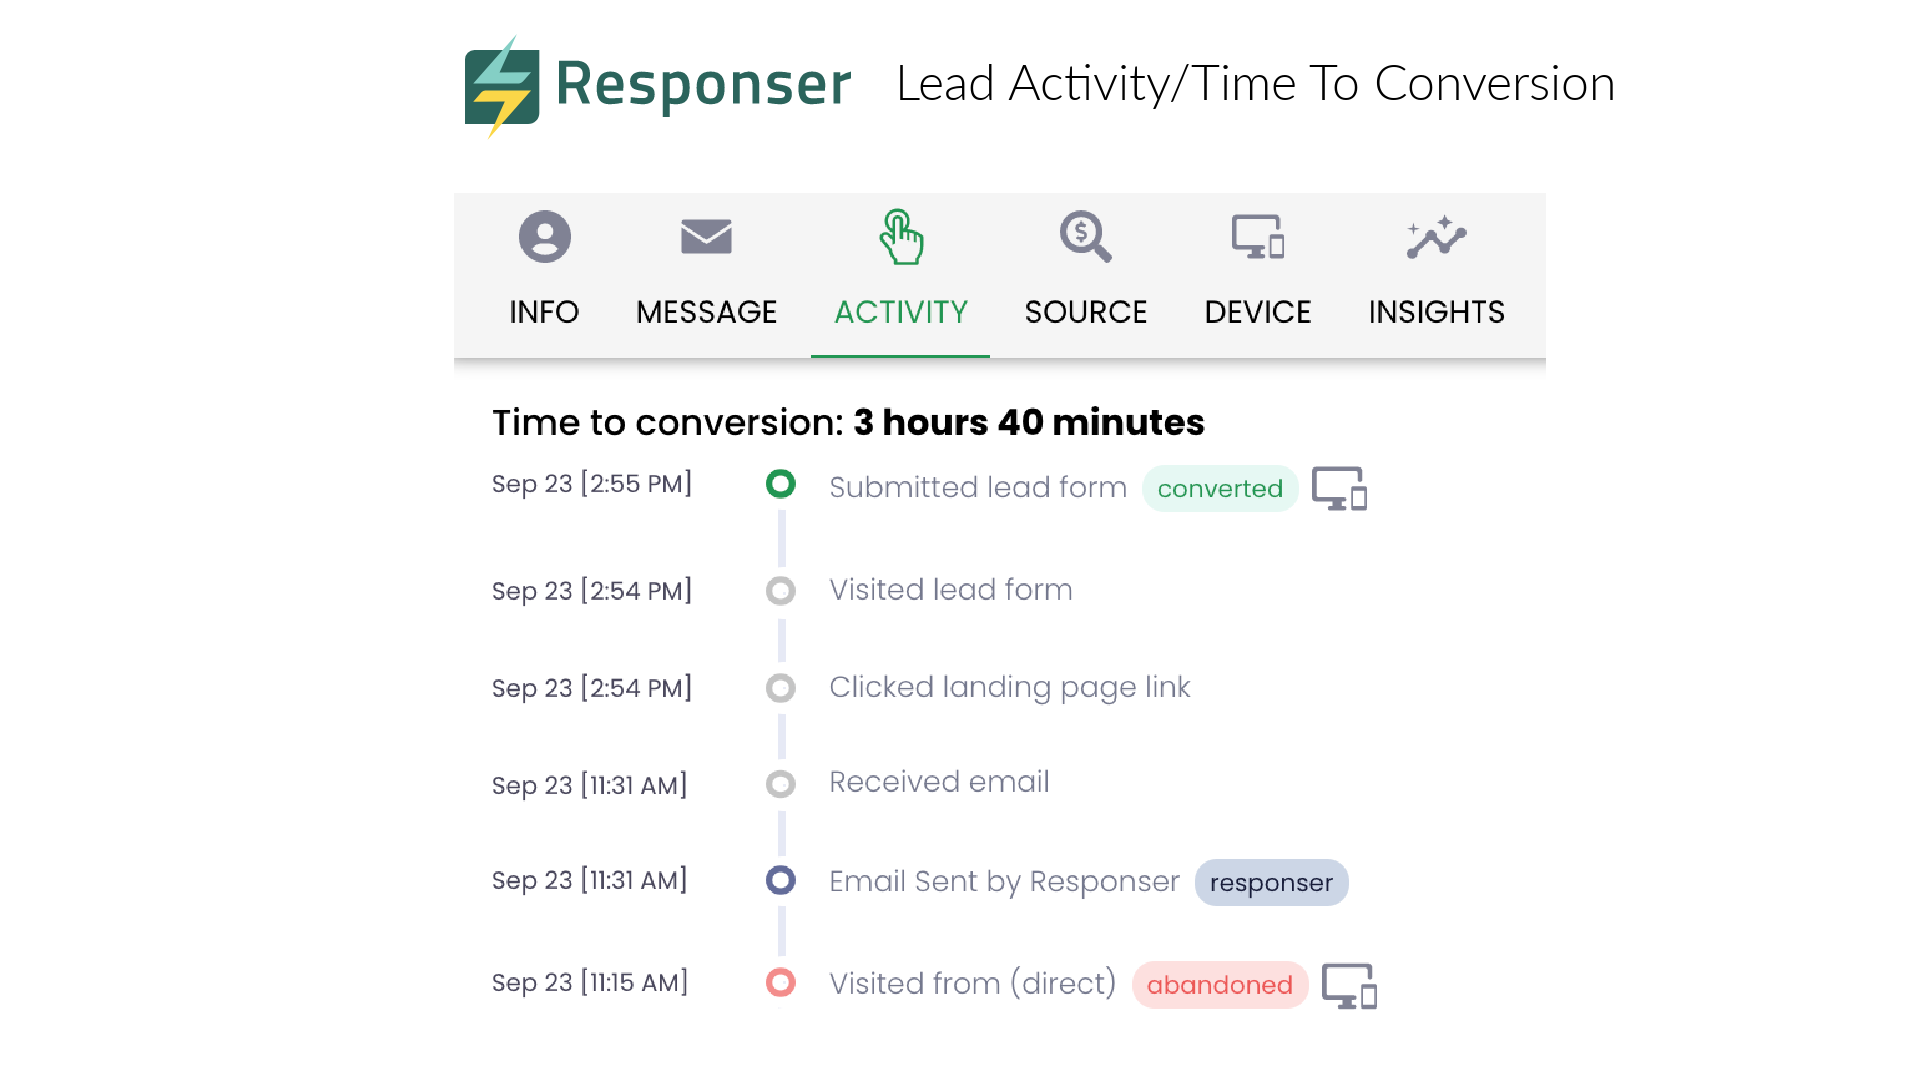 Lead Management with insights into lead activity and Time To Conversion.